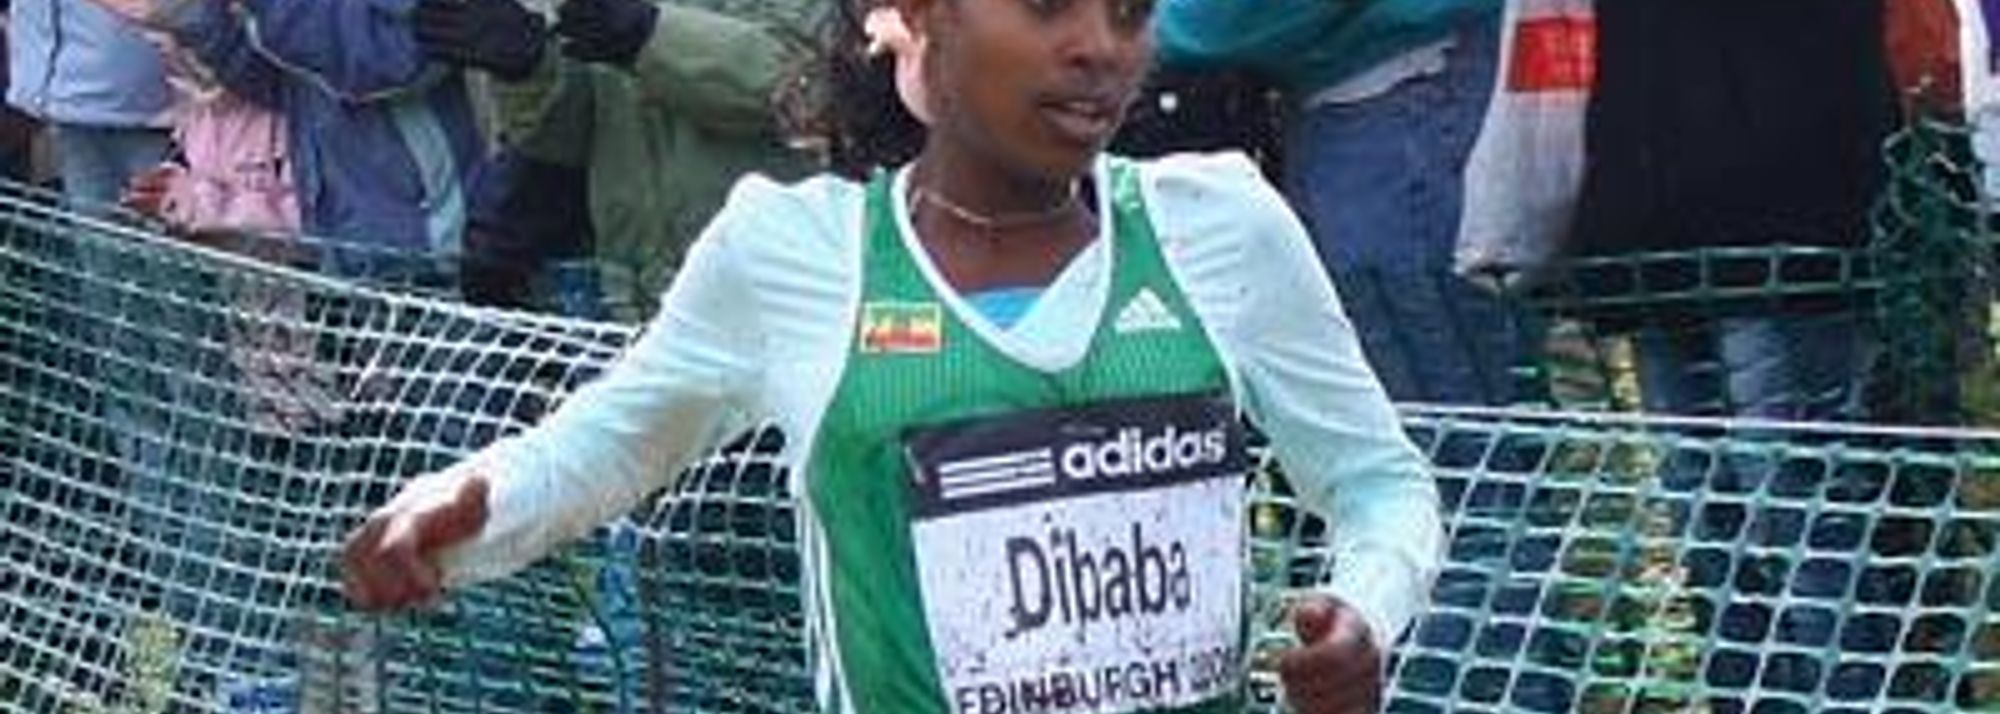 There was a familiar name on the vest and a familiar smile on the face of Genzebe Dibaba as she bounced down the final, muddy slope of the three-lap course at Edinburgh’s Holyrood Park this afternoon and sped across the line to become the 2007 IAAF World Junior Cross Country champion emulating her older sister Tirunesh who won the title in 2003.